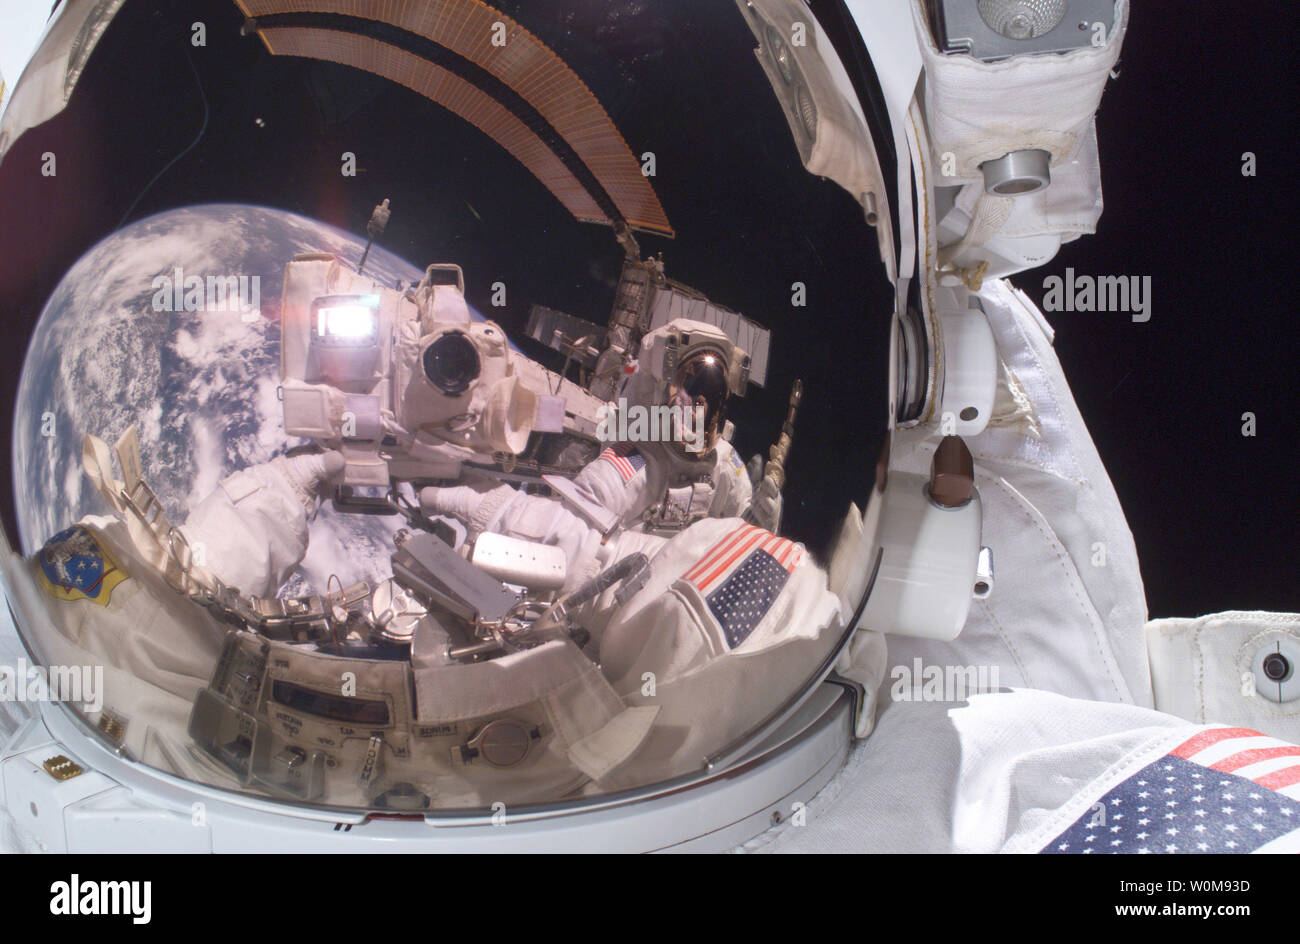 Astronaut Michael Fossum takes a self-portrait on July 8, 2006 during a space walk or extravehicular activity while the Discovery orbiter is docked with the International Space Station. Turning his camera to snap a picture of his own helmet visor, he also recorded the reflection of his fellow mission specialist, Piers Sellers, near picture center and one of the space station's gold-tinted solar power arrays arcing across the top.  (UPI Photo/Michael Fossum/NASA) Stock Photo